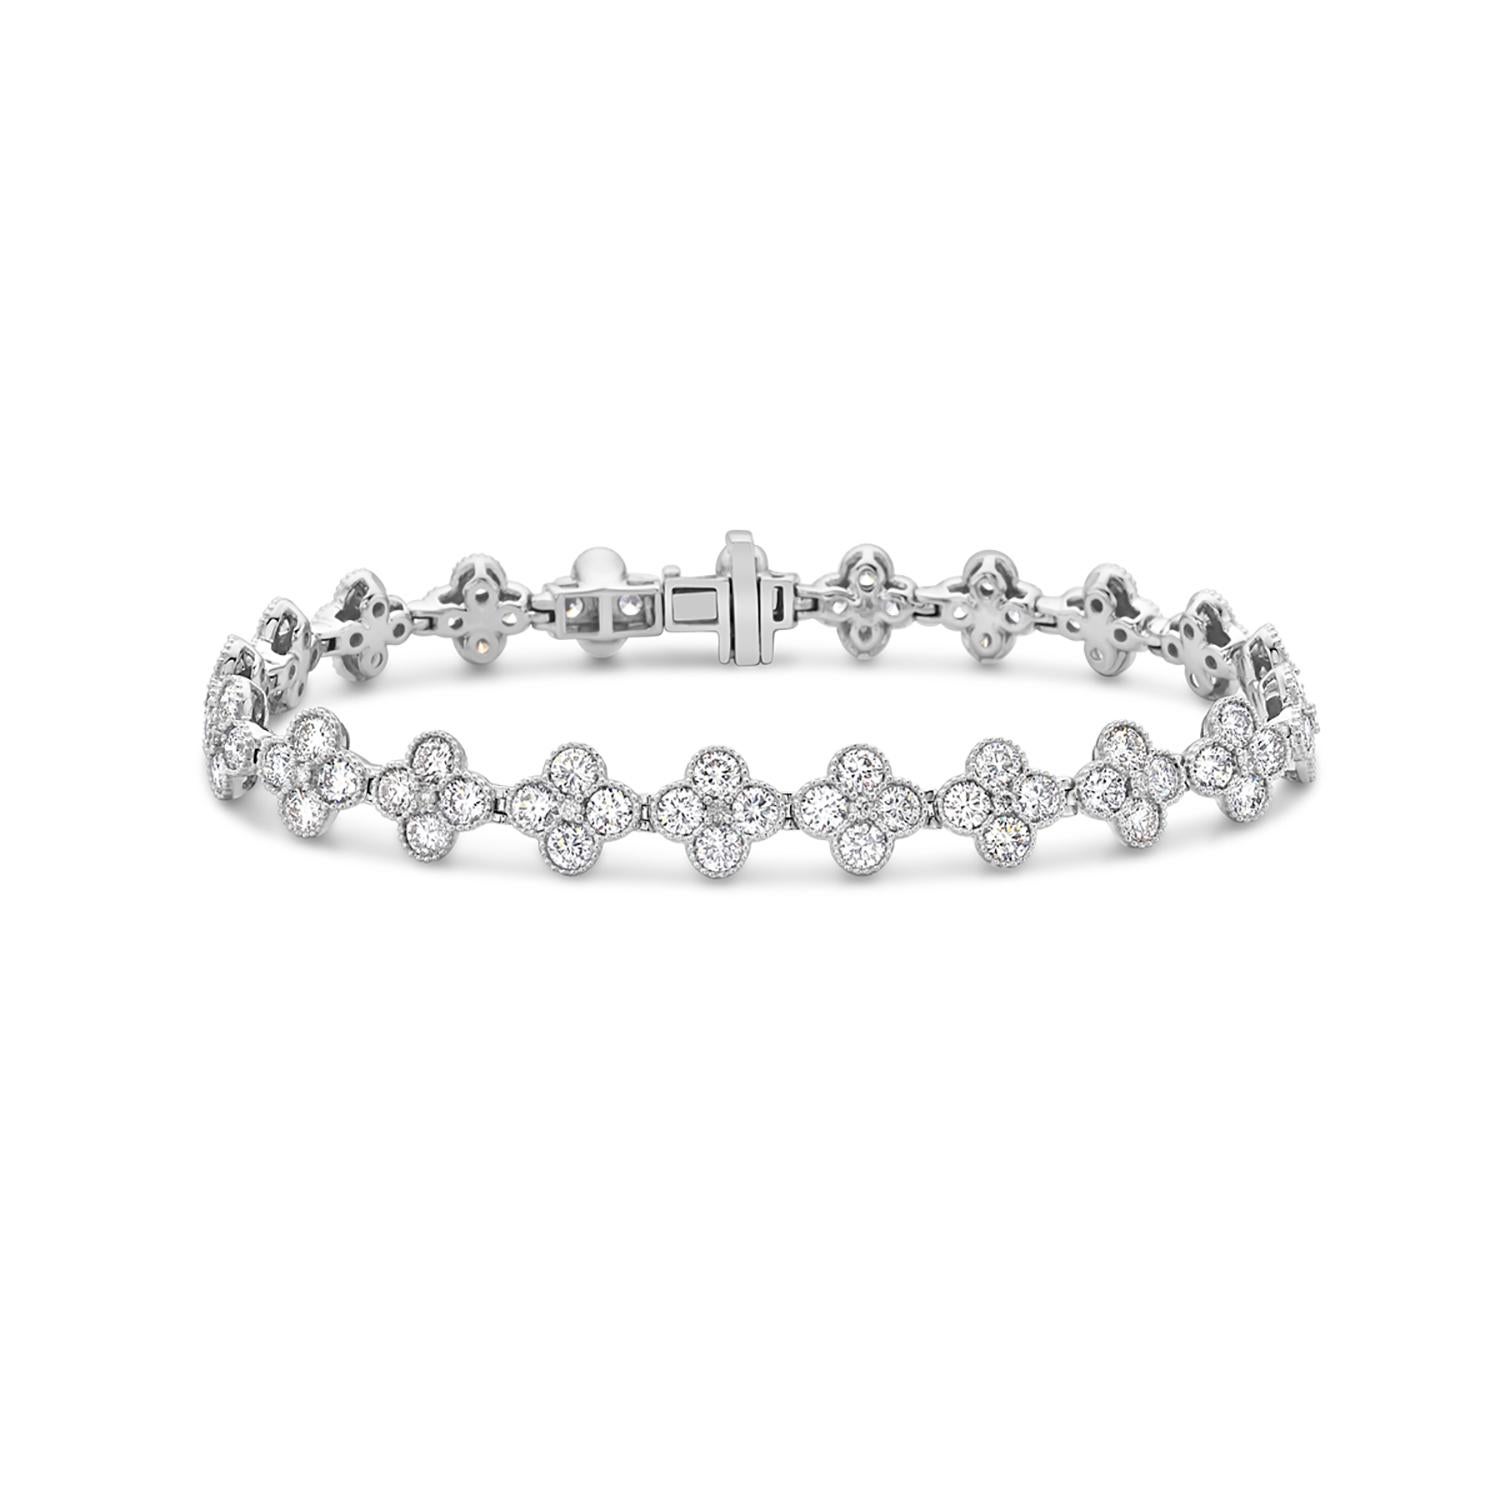 The Quatrefoil Halo Diamond Tennis Bracelet is a stunning piece of jewelry crafted from 18k white gold. It features a quatrefoil design, which is a four-leaf clover shape, encrusted with sparkling diamonds. It is a perfect accessory for any special